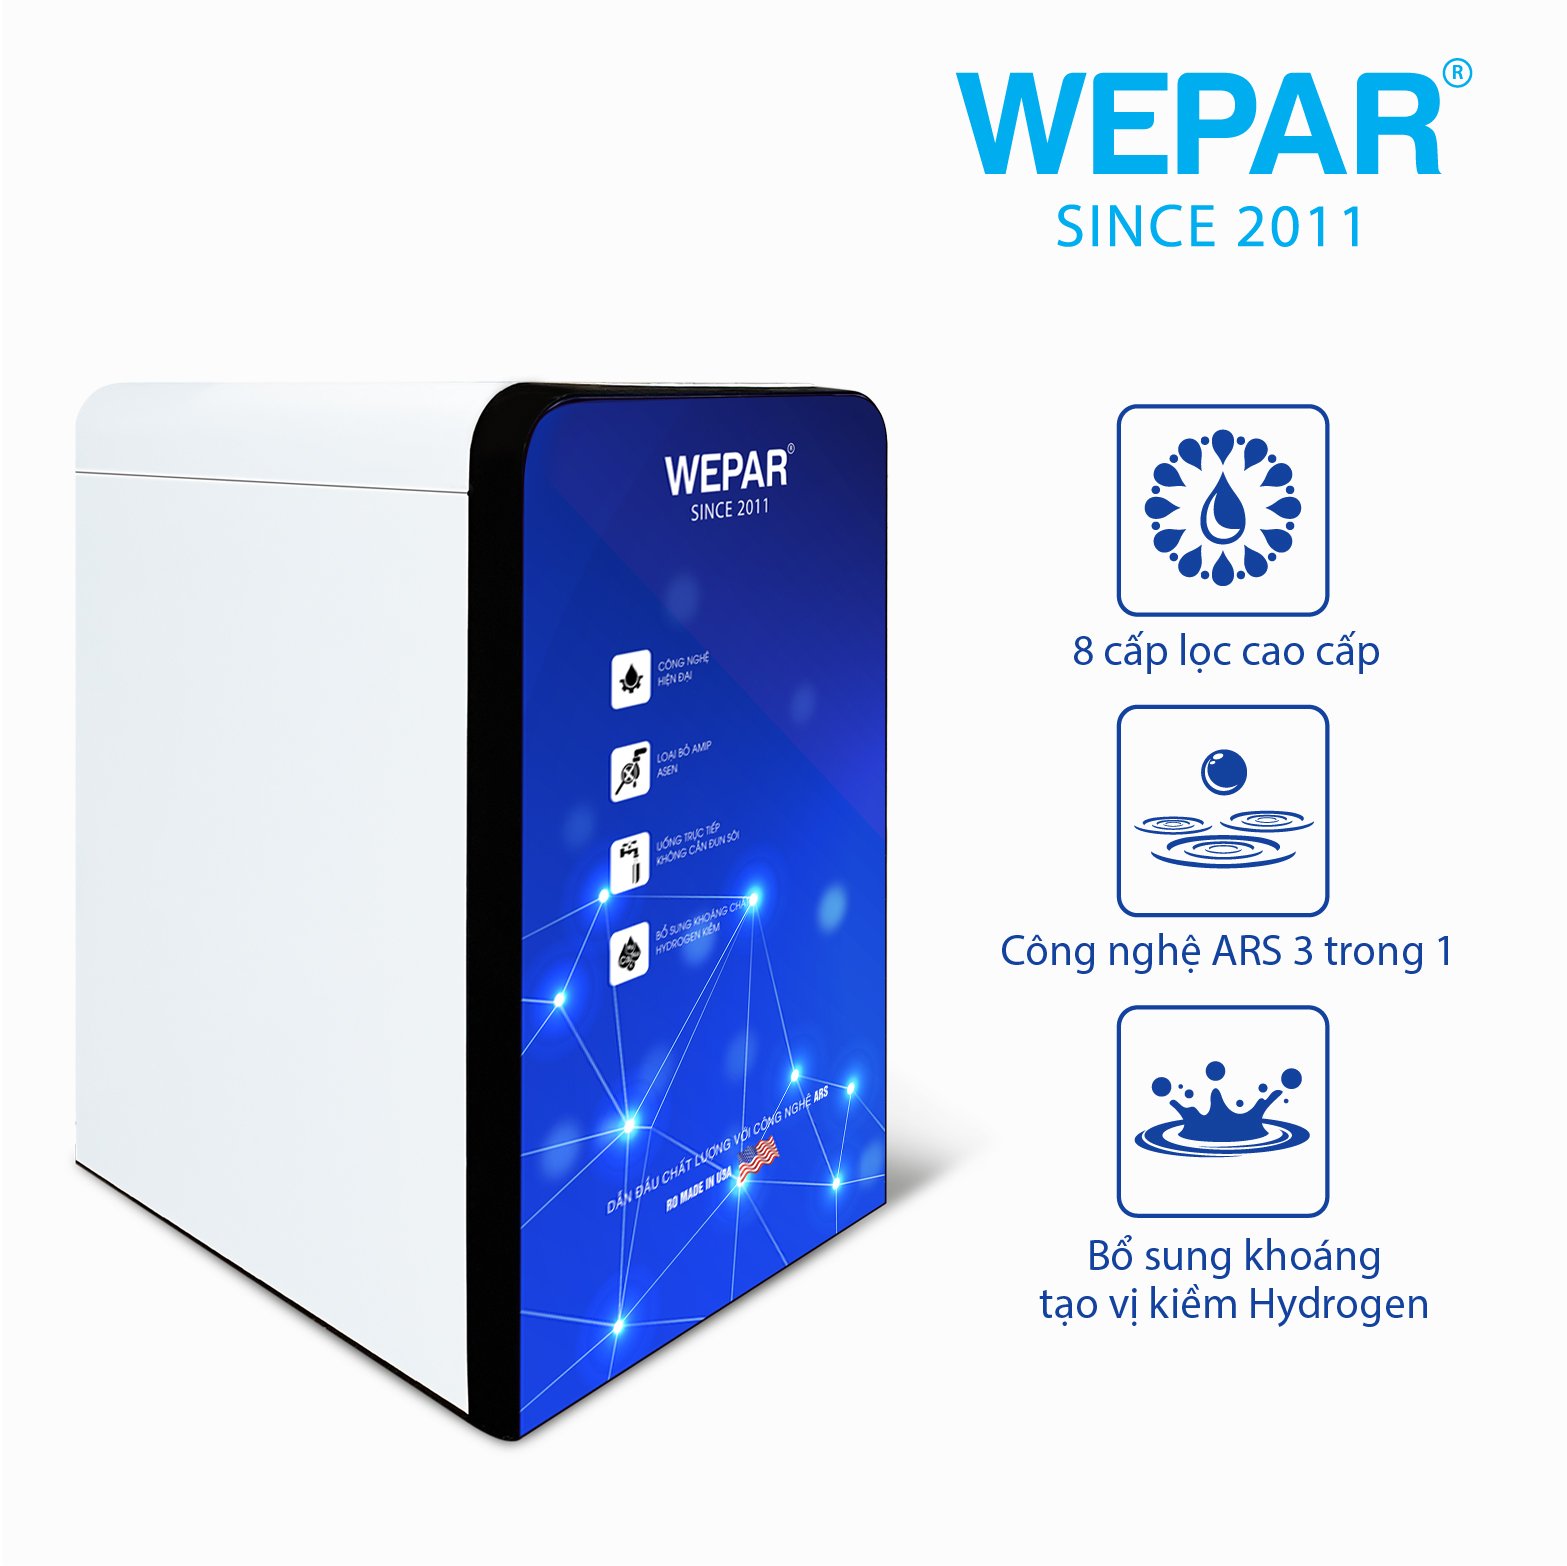 WP8-Lux Hydrogen cao cấp